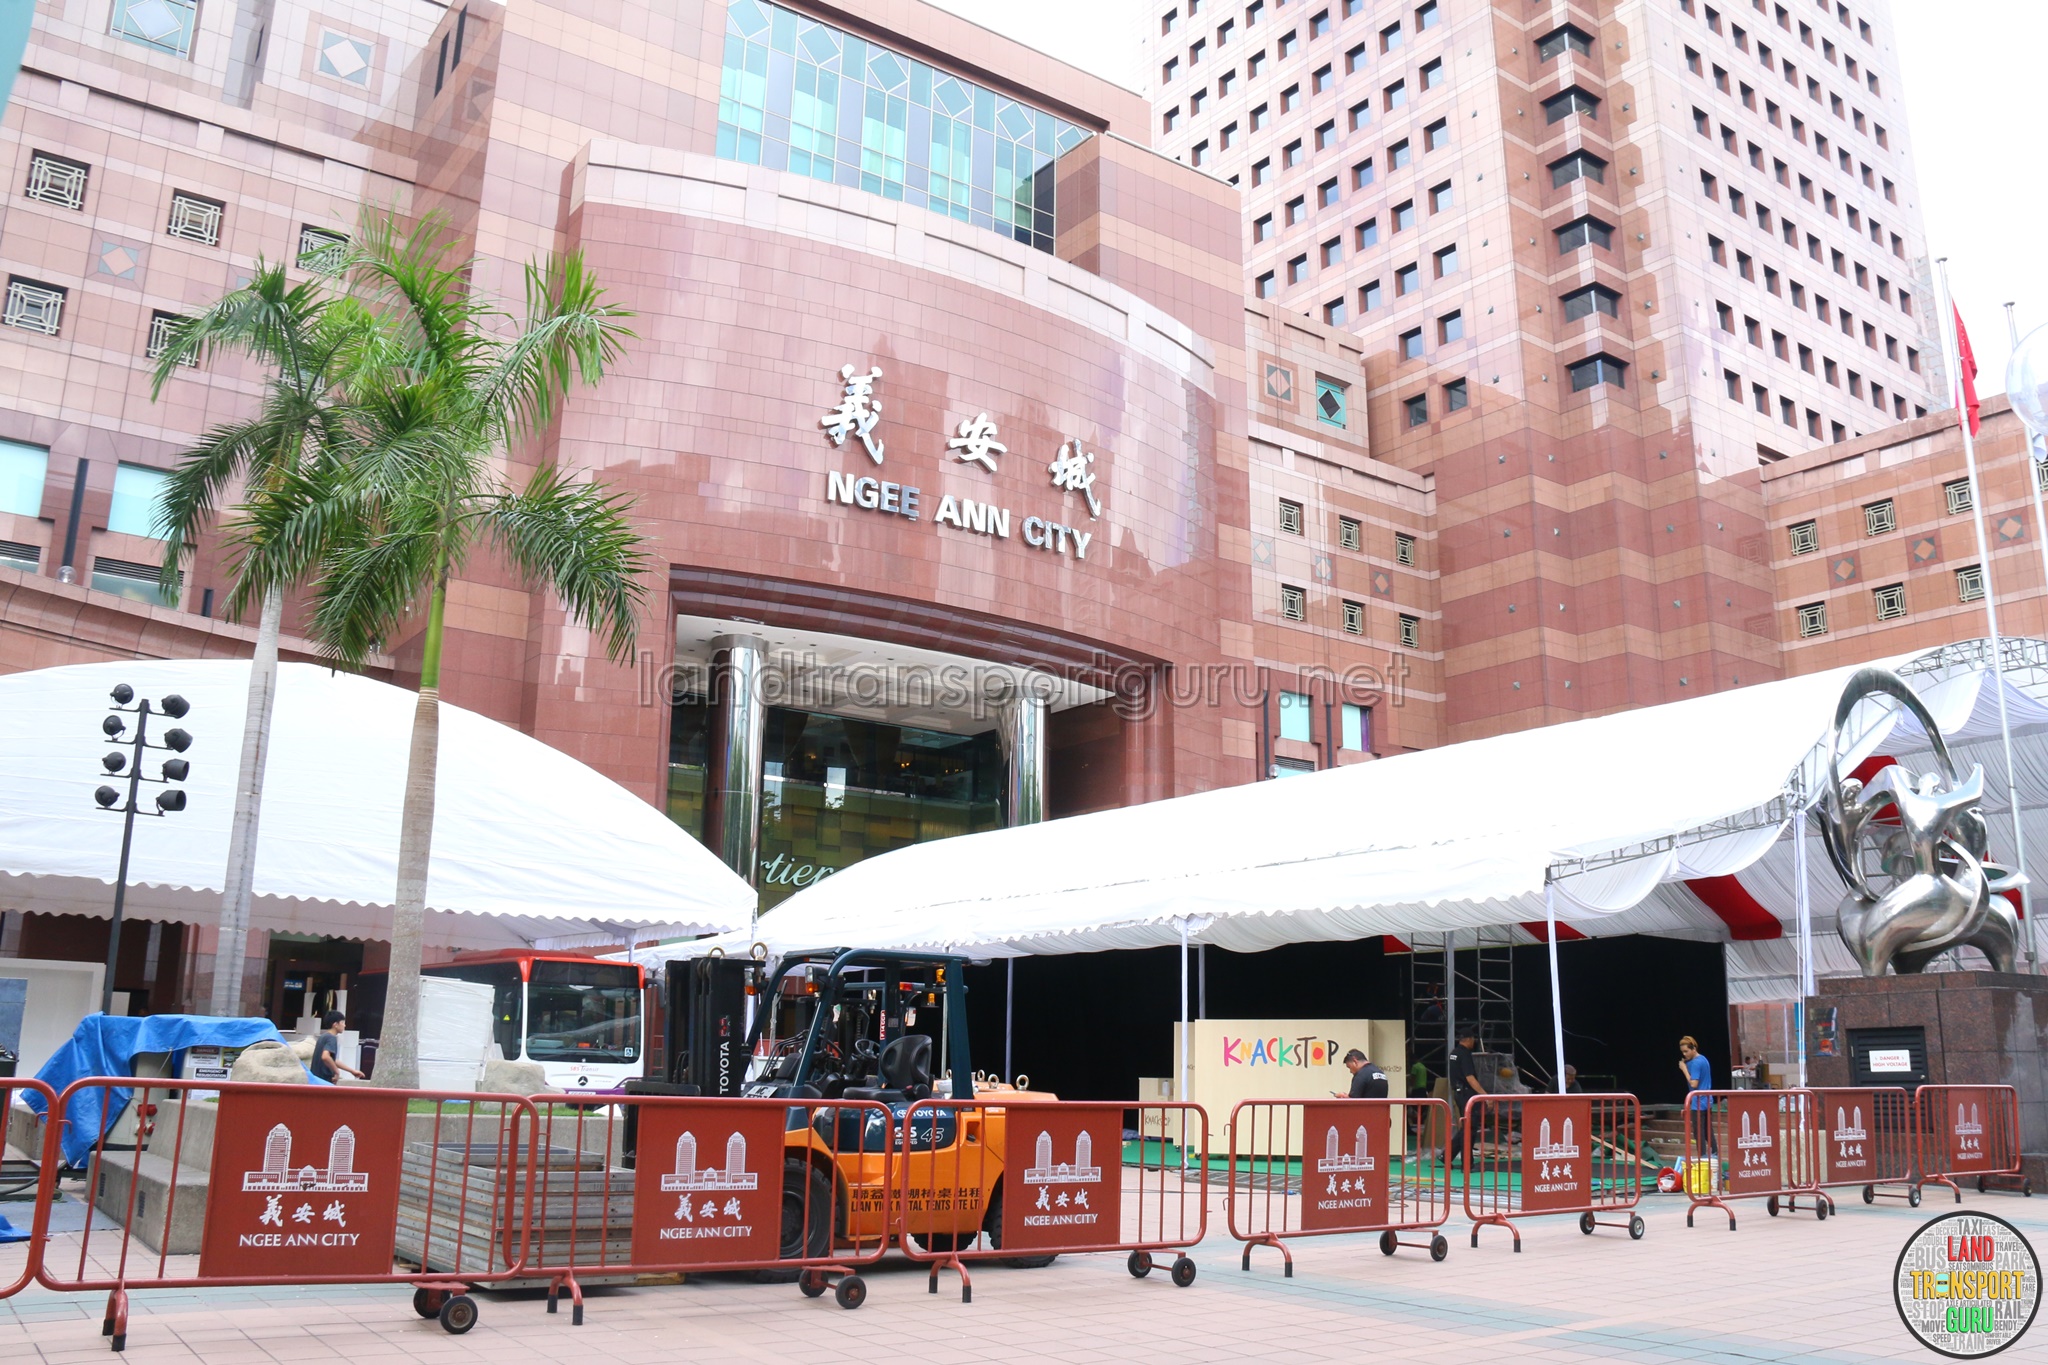 Ngee Ann City - Singapore: Get the Detail of Ngee Ann City on